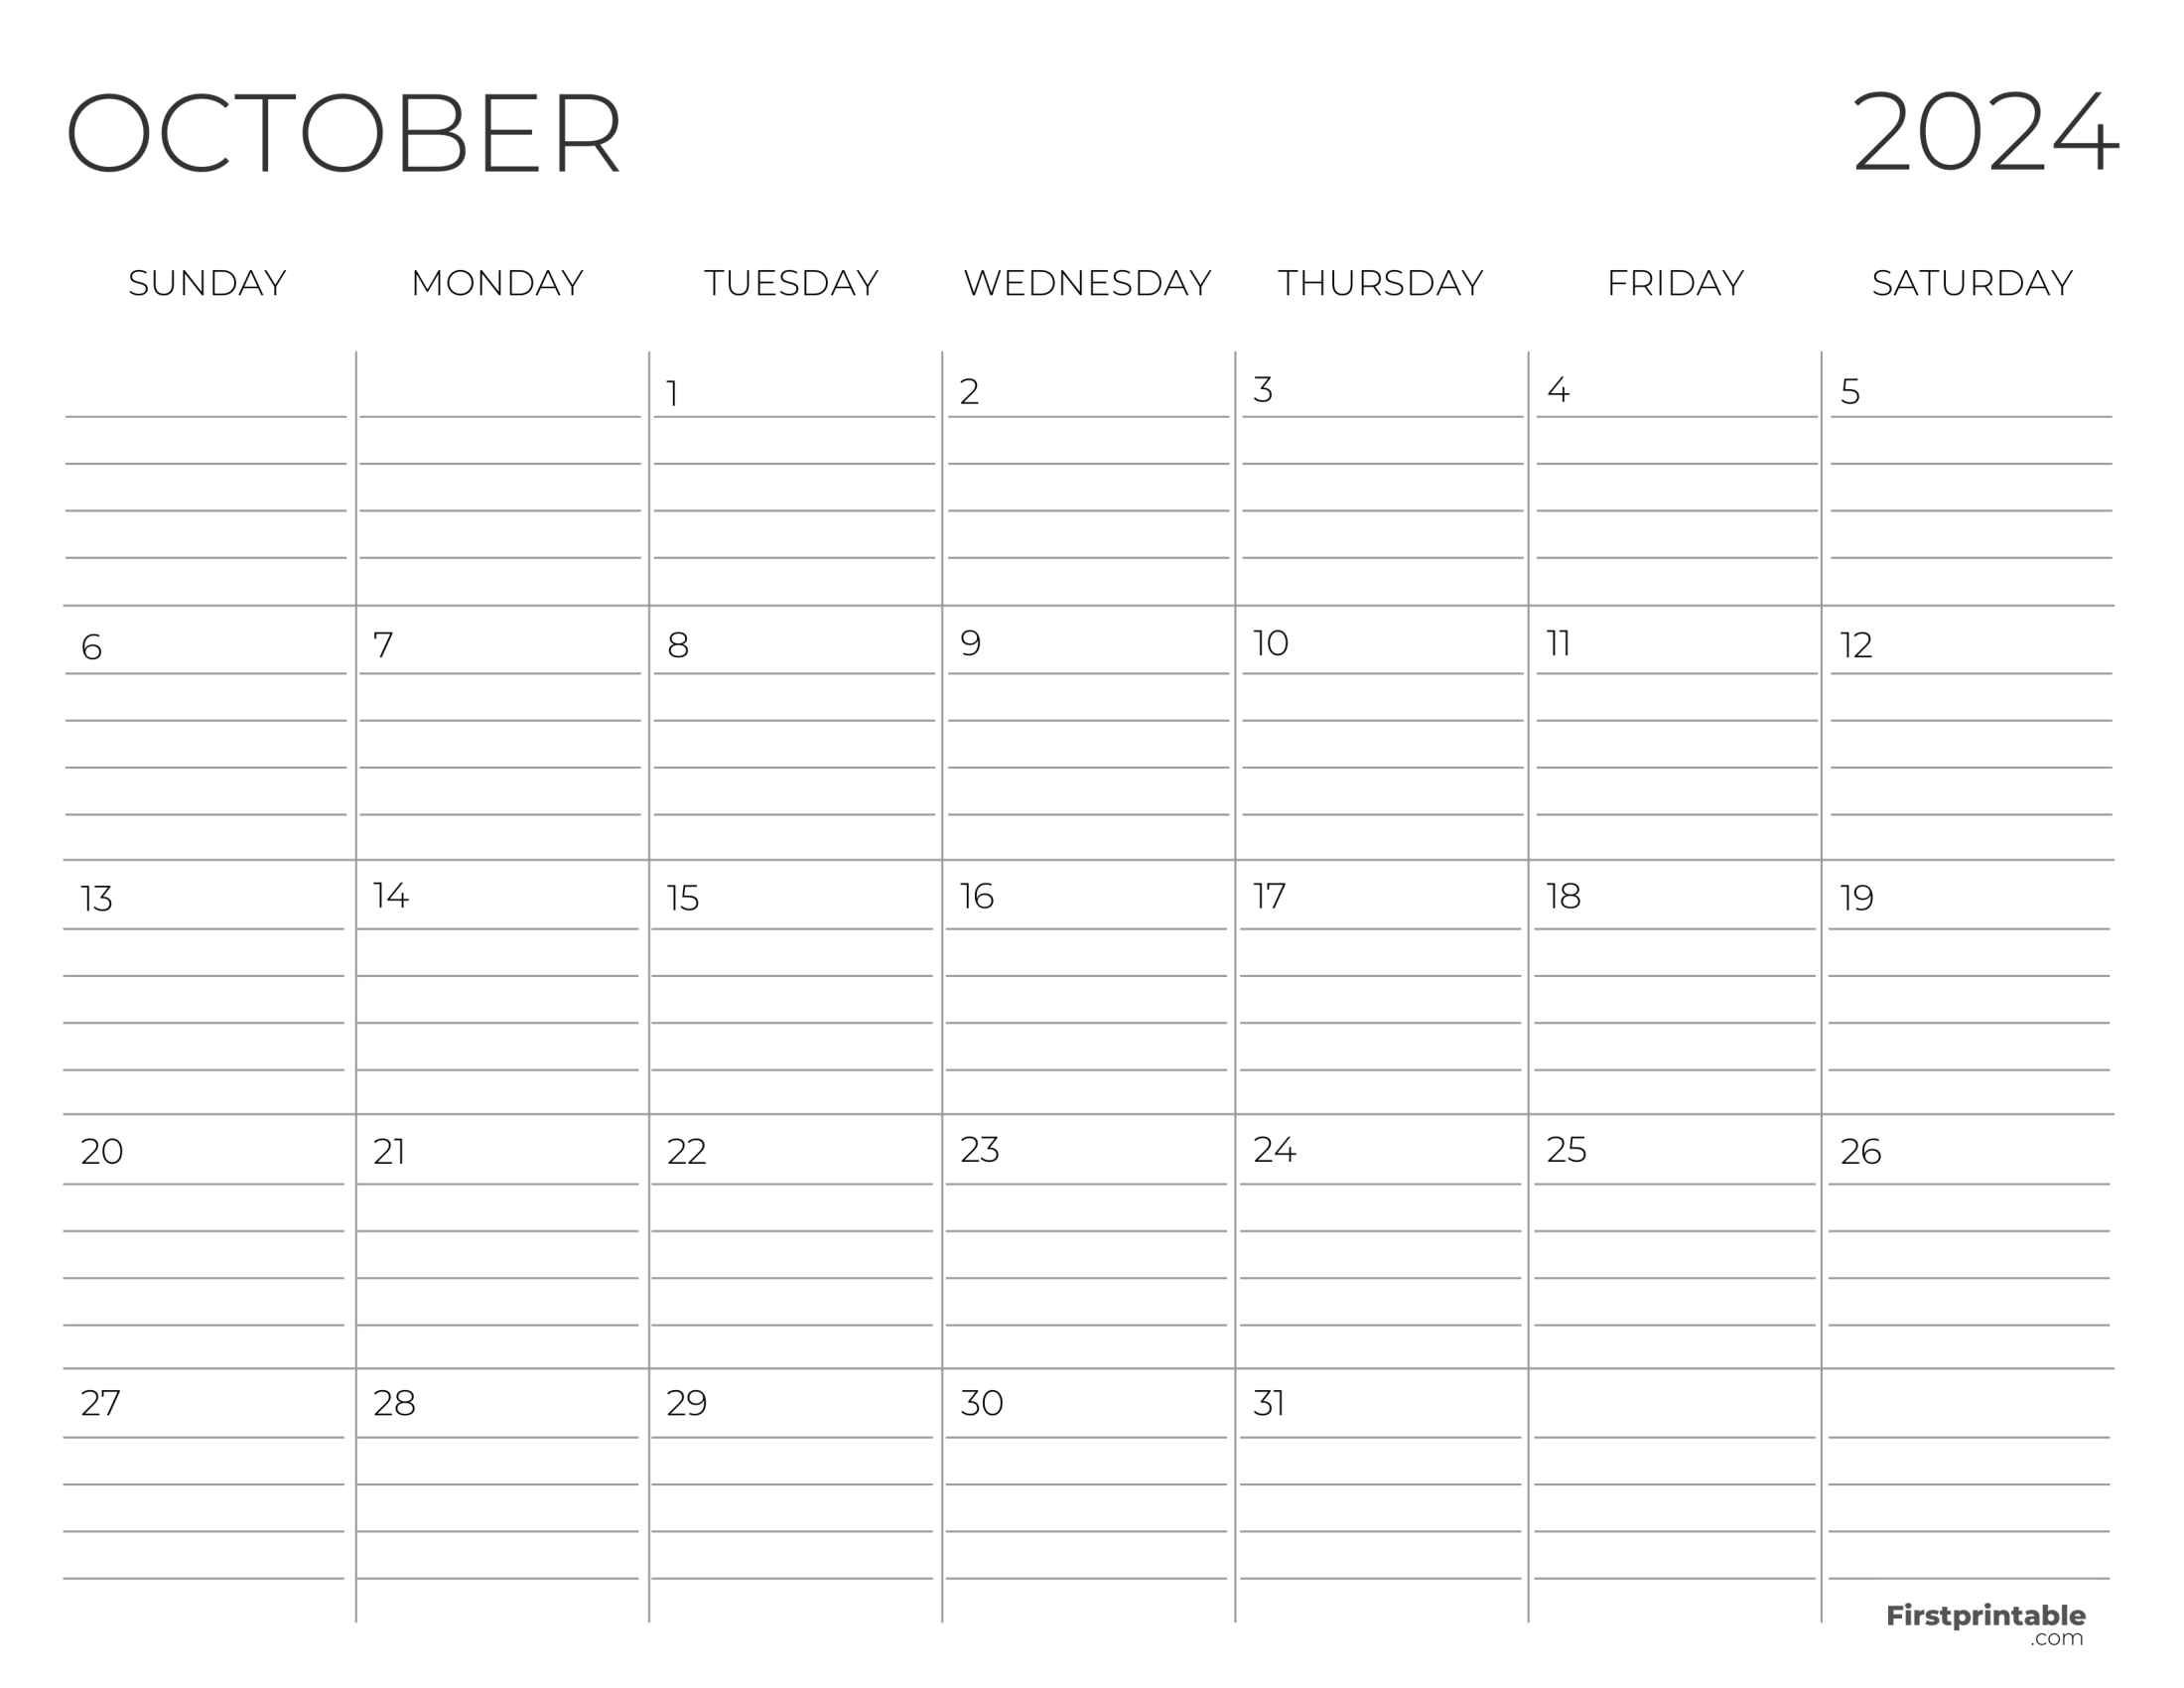 October Calendar 2024 with lines - Printable and Fillable